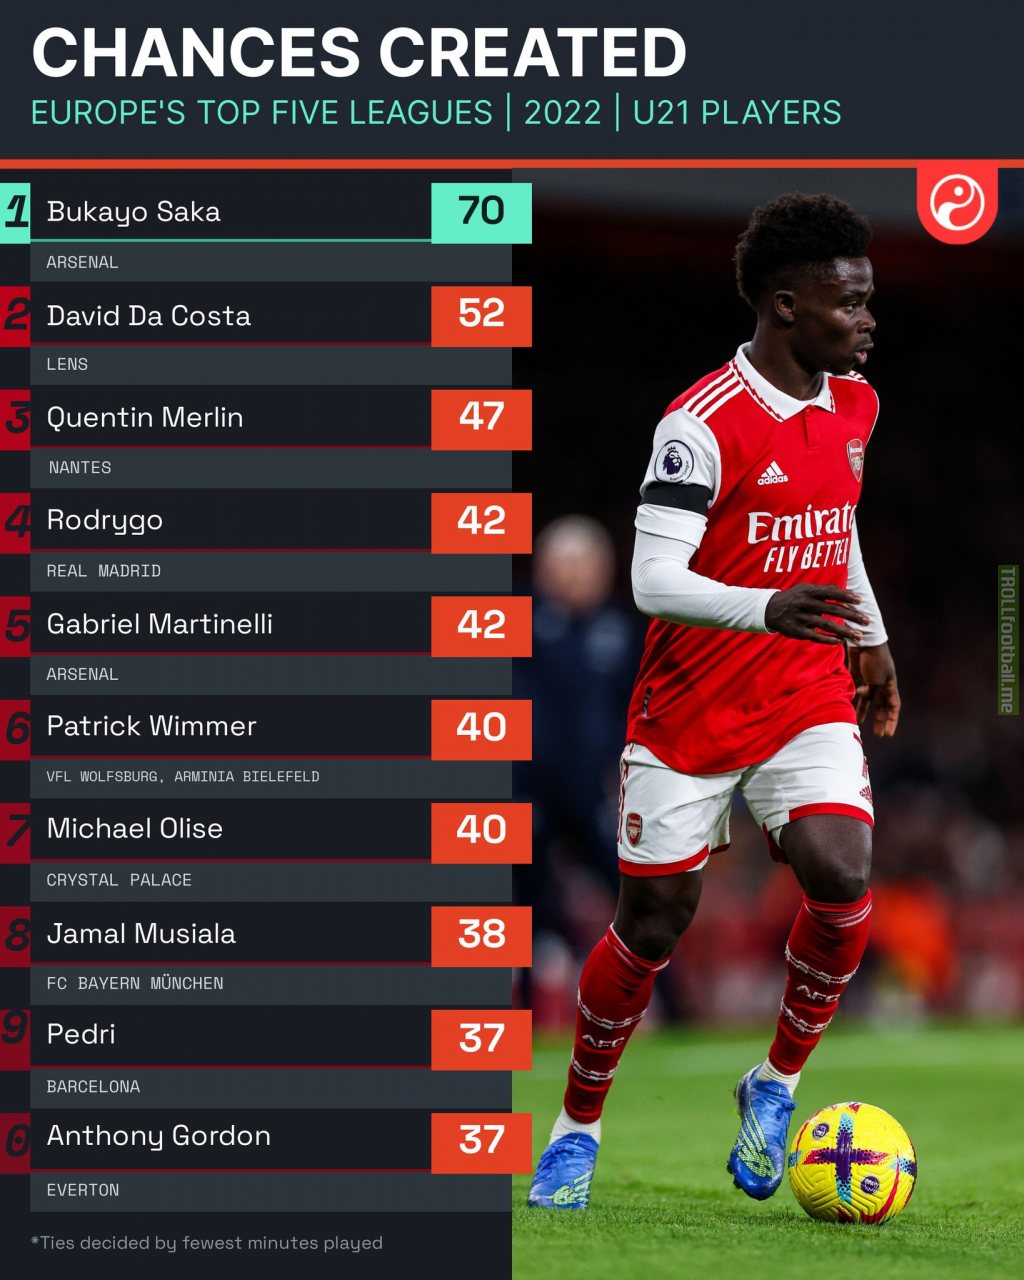 (Squawka) Most chances created by under 21 Players in 2022